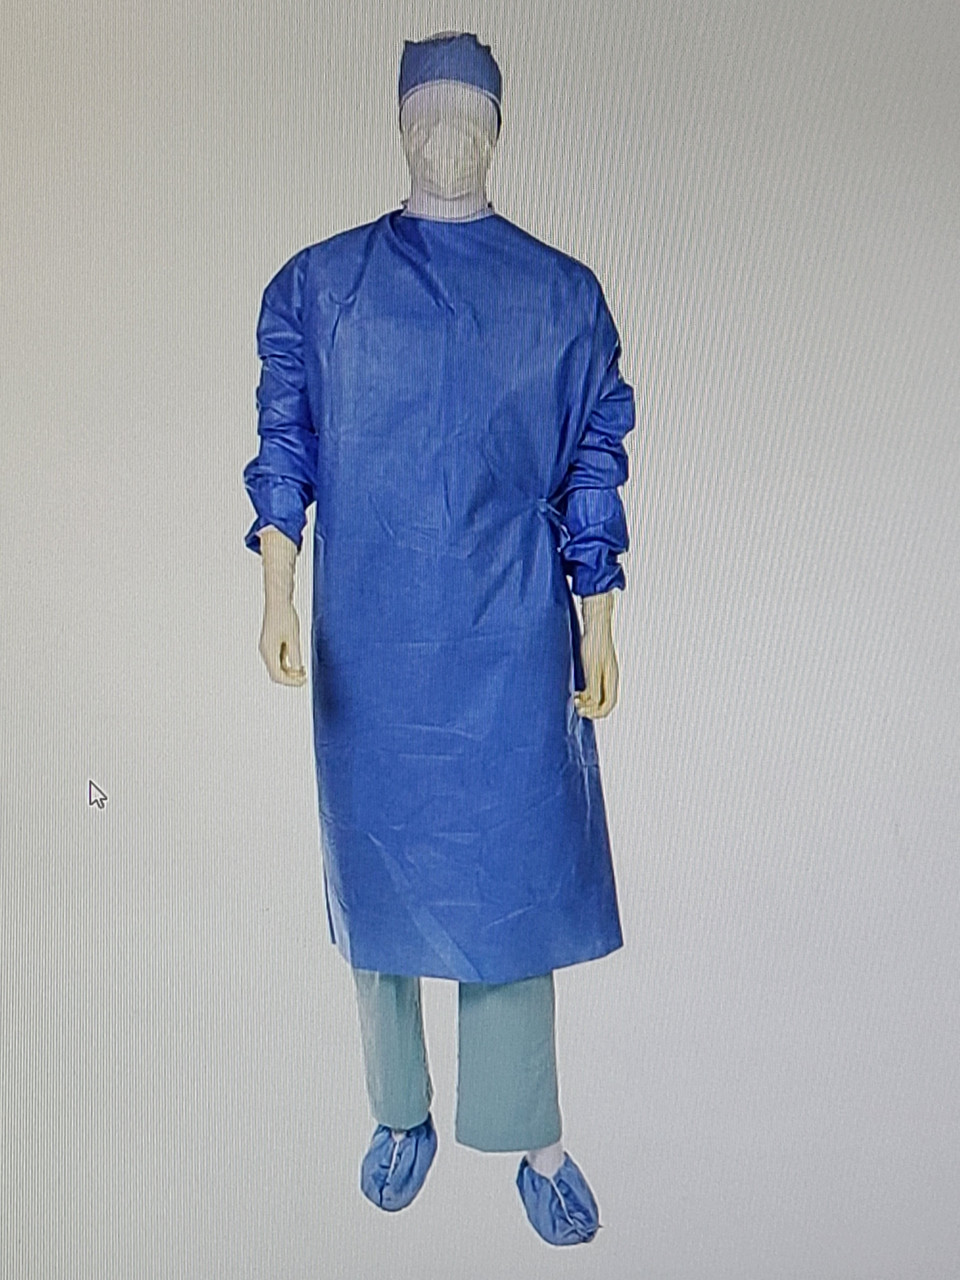 36) HALYARD 44661NS Aero Chrome Breathable Performance Surgical Gown SMALL  for sale online | eBay